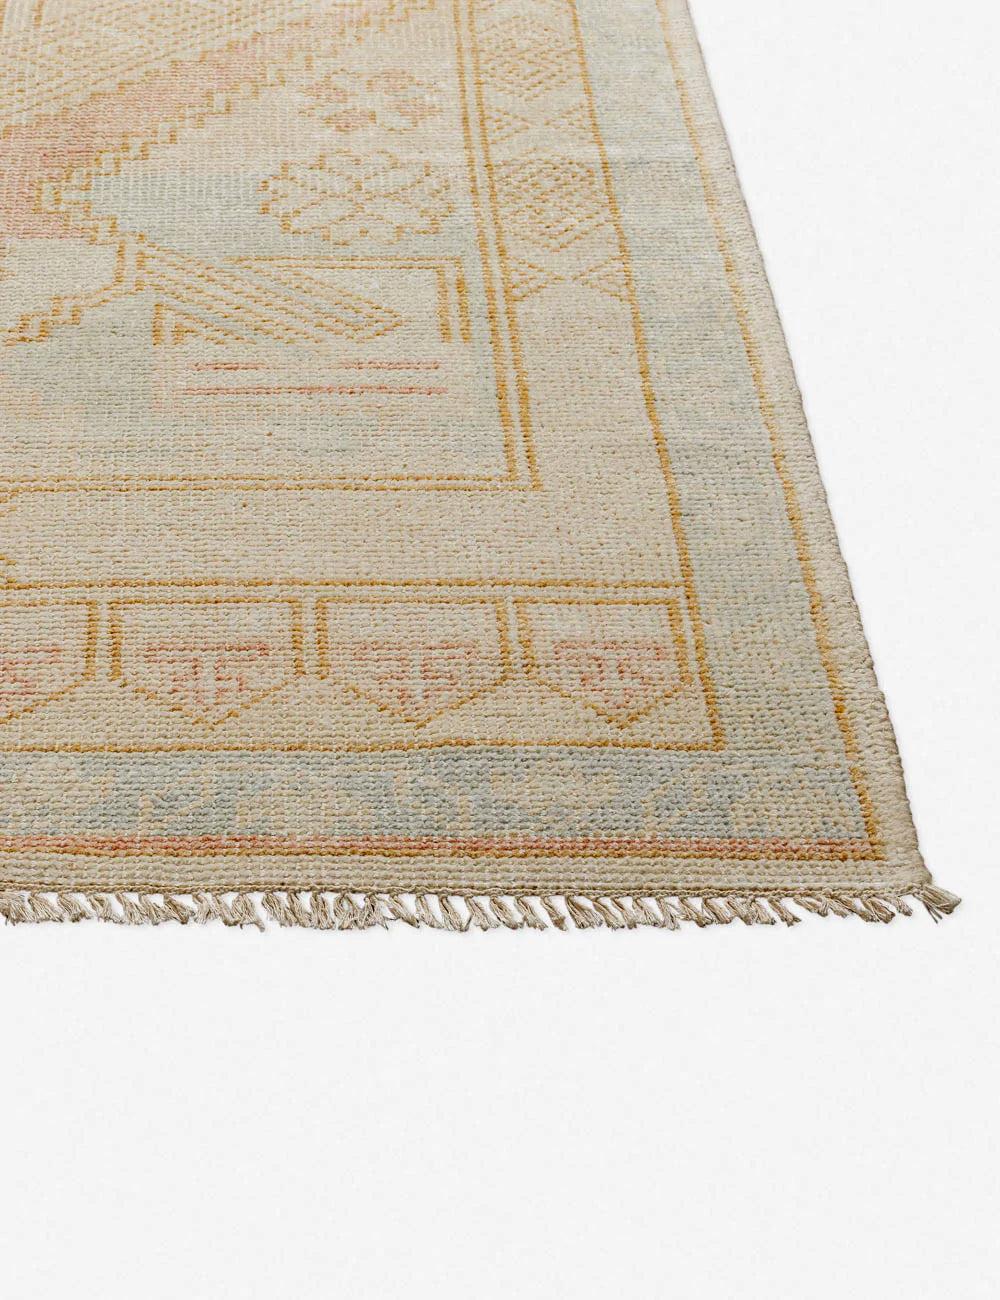 Serene Blue Hand-Knotted Wool-Blend Accent Rug - 2' x 3'